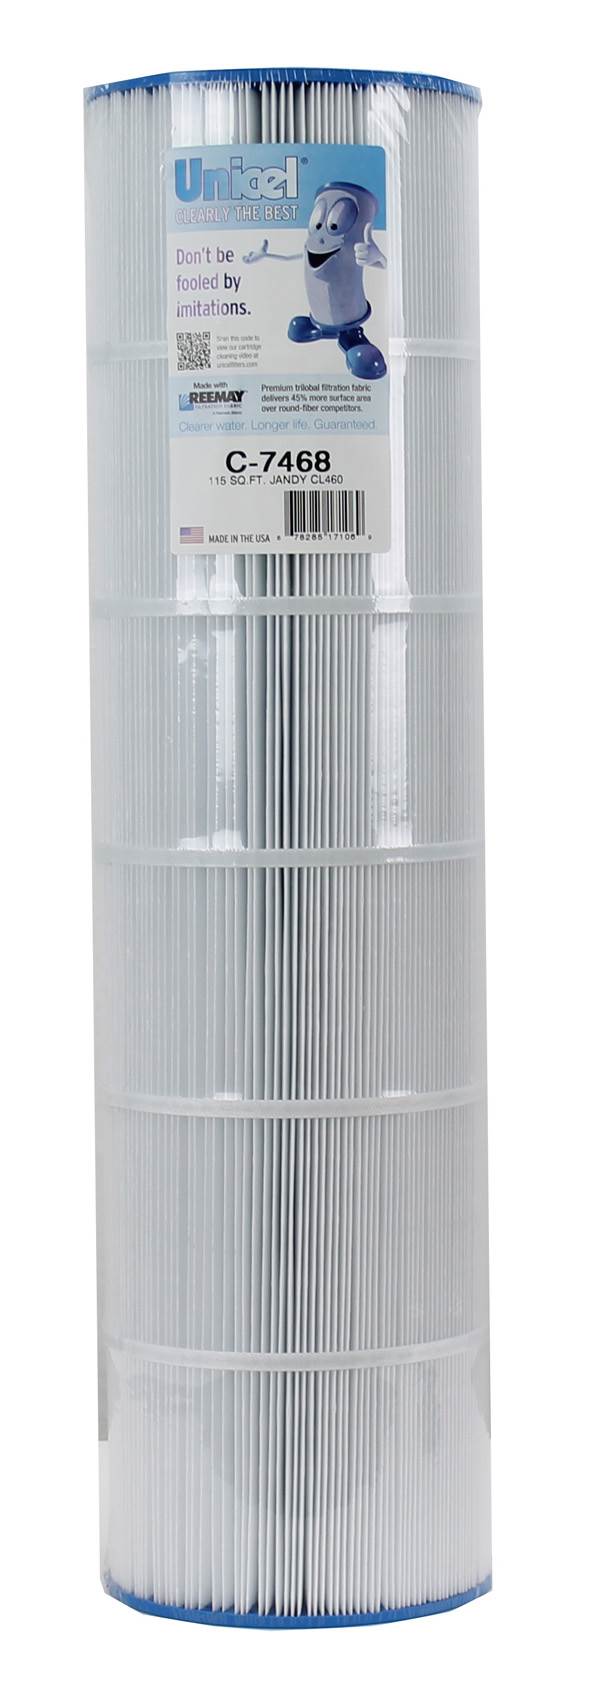 Unicel C-7468 Replacement 115 Sq Ft Swimming Pool Filter Cartridge, 175 Pleats